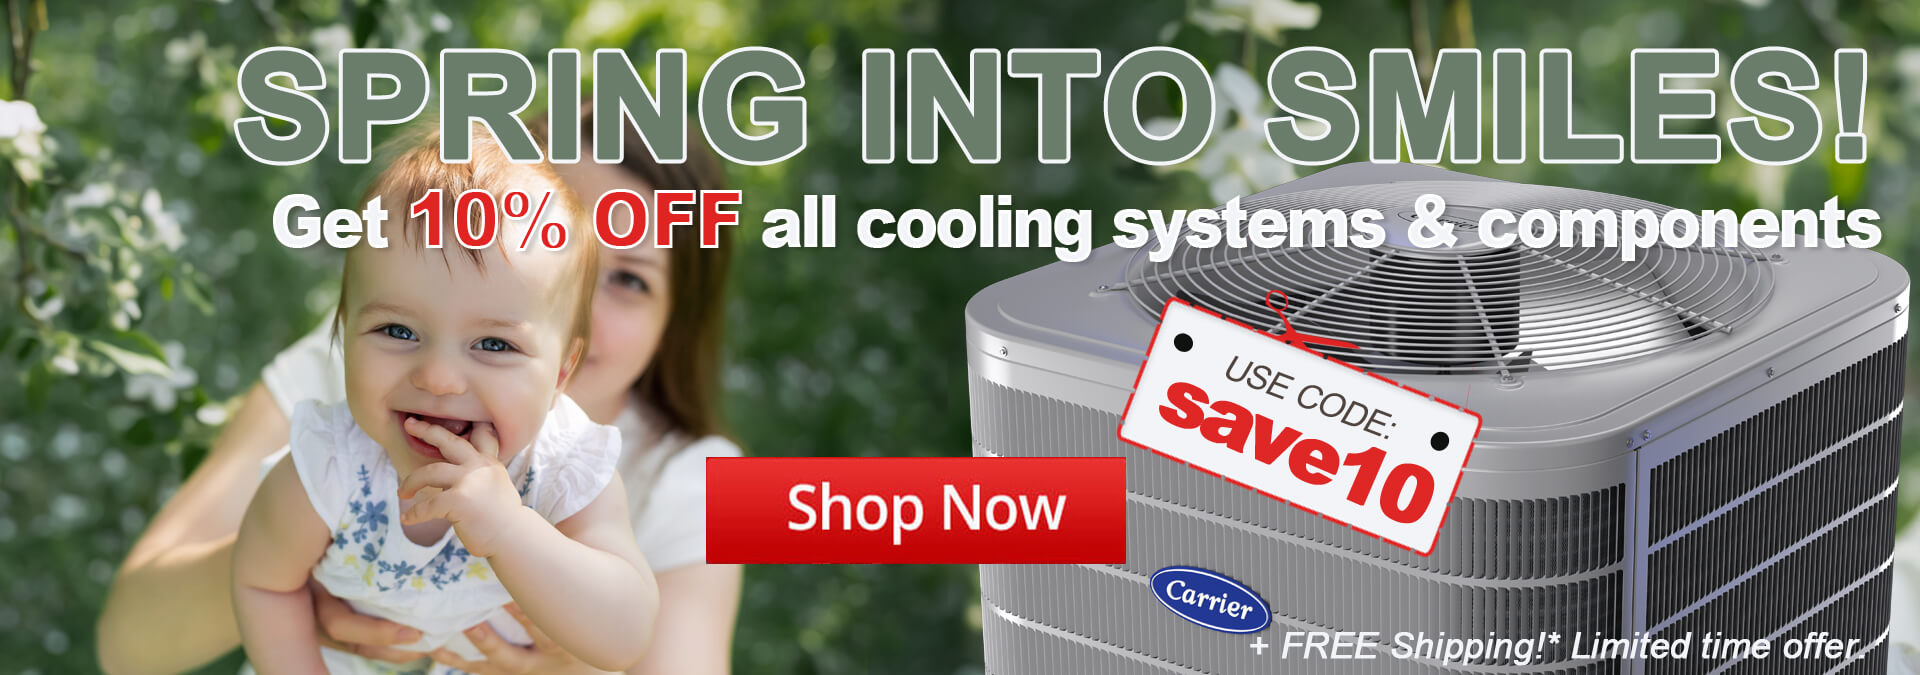 Save 10% on all Cooling Systems and Components